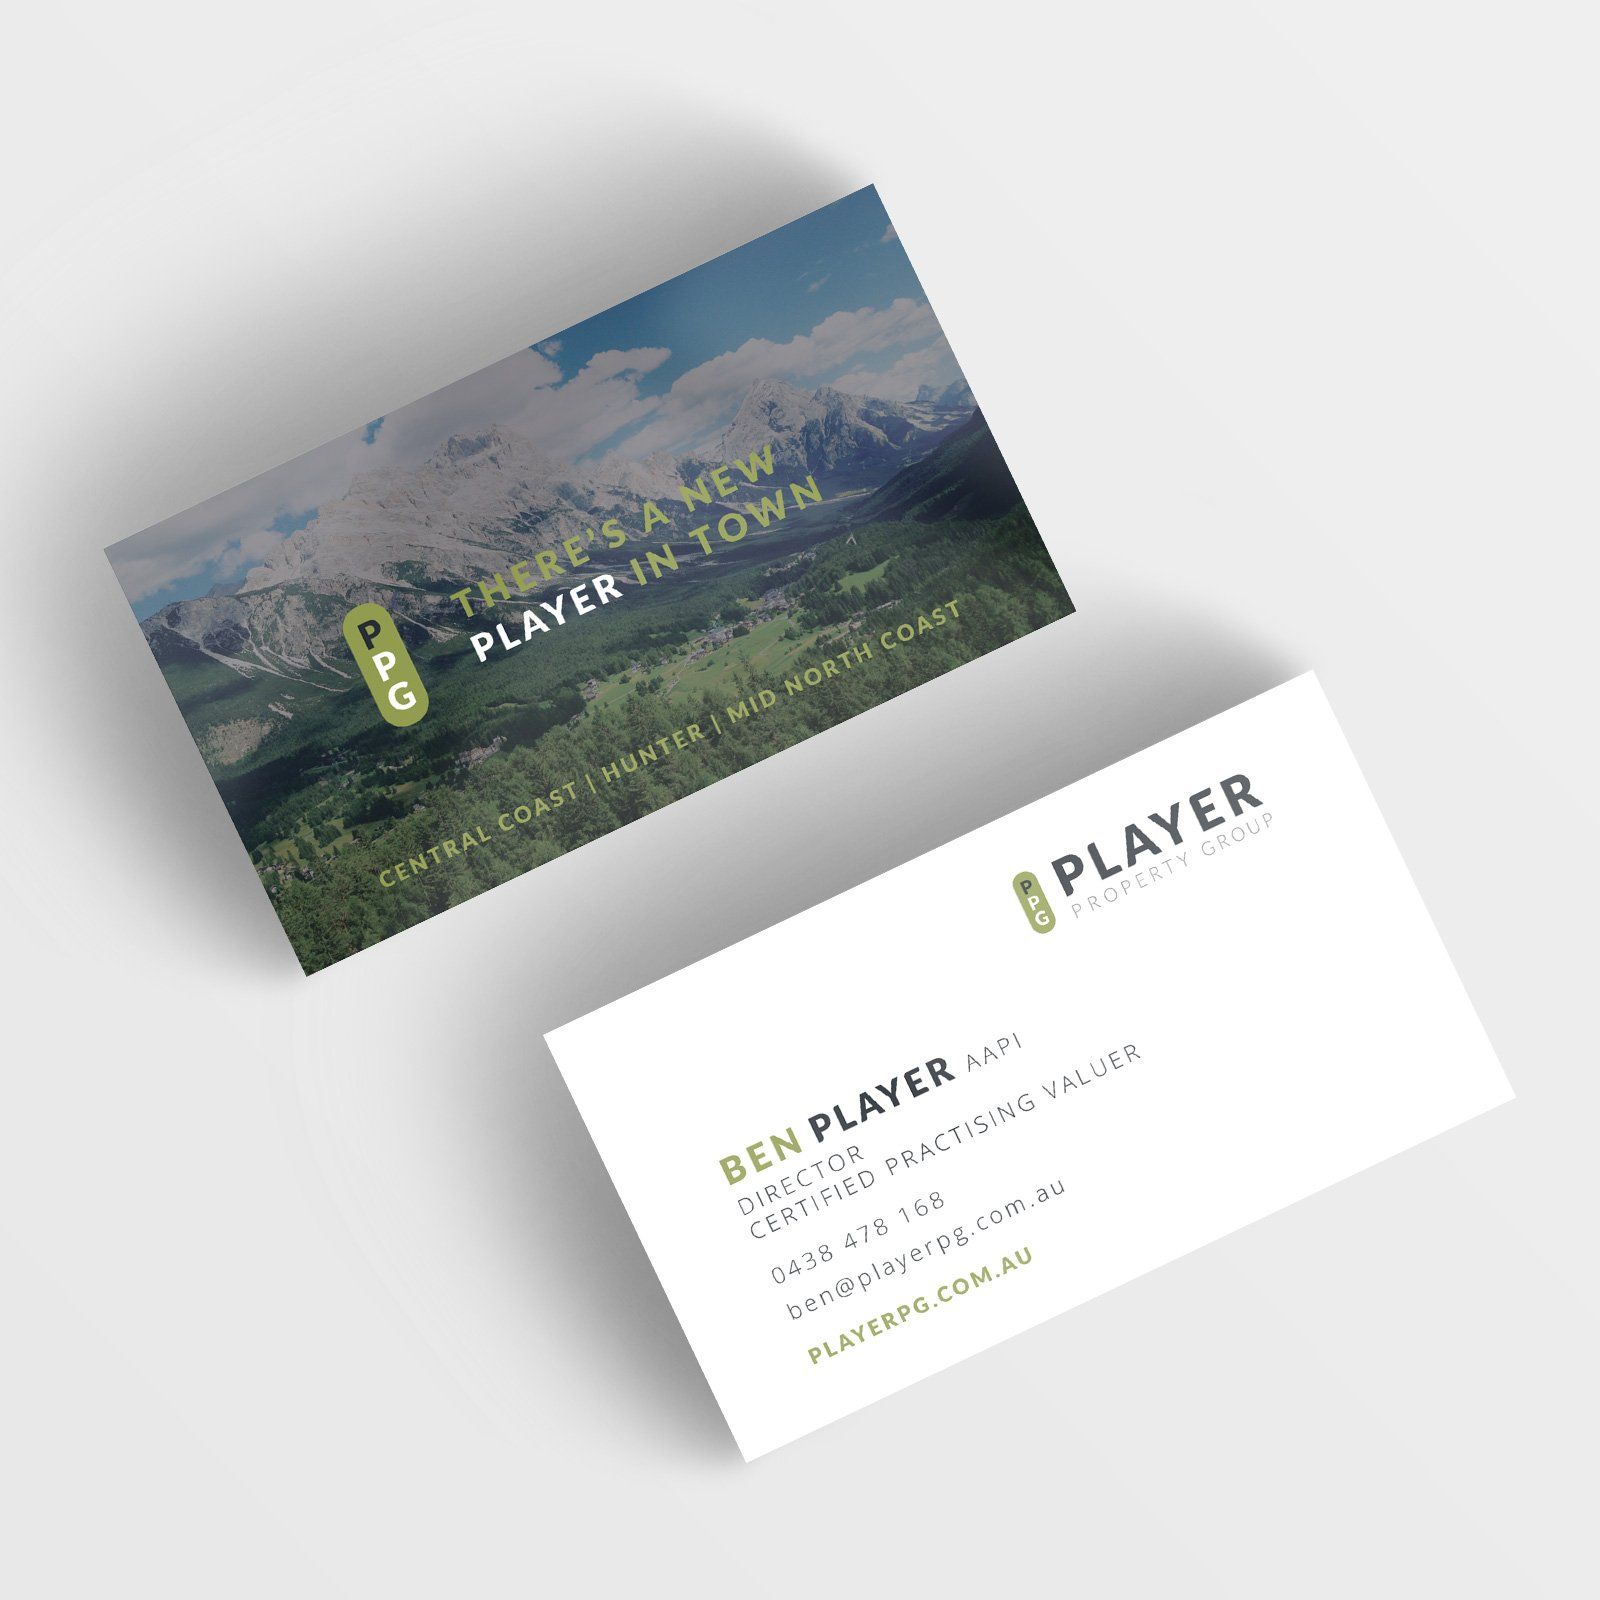 Player Property Group Business Cards